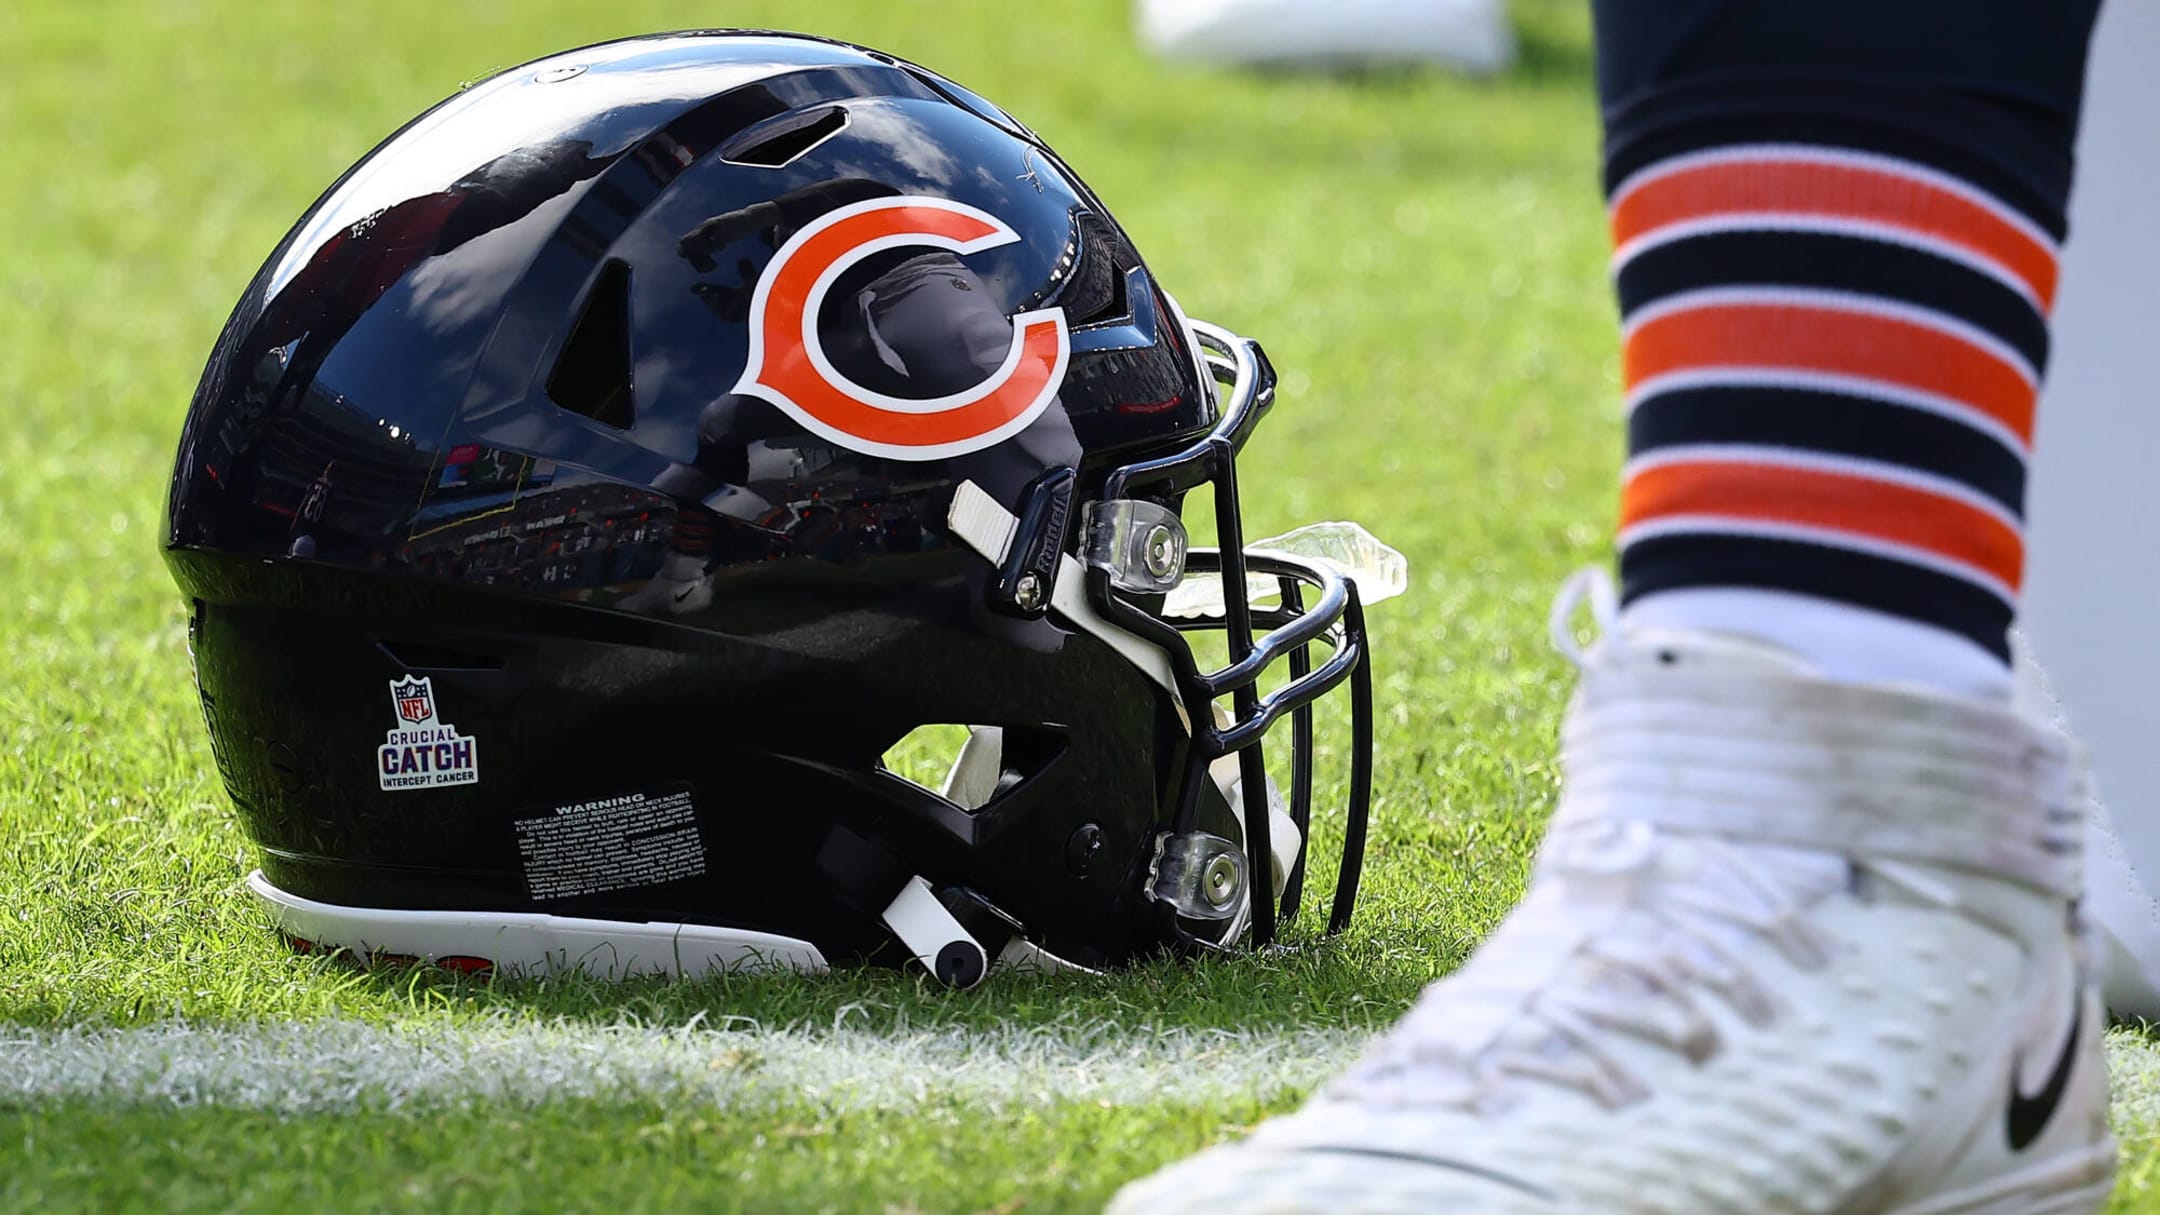 What we know about the Bears assistant coach and front office